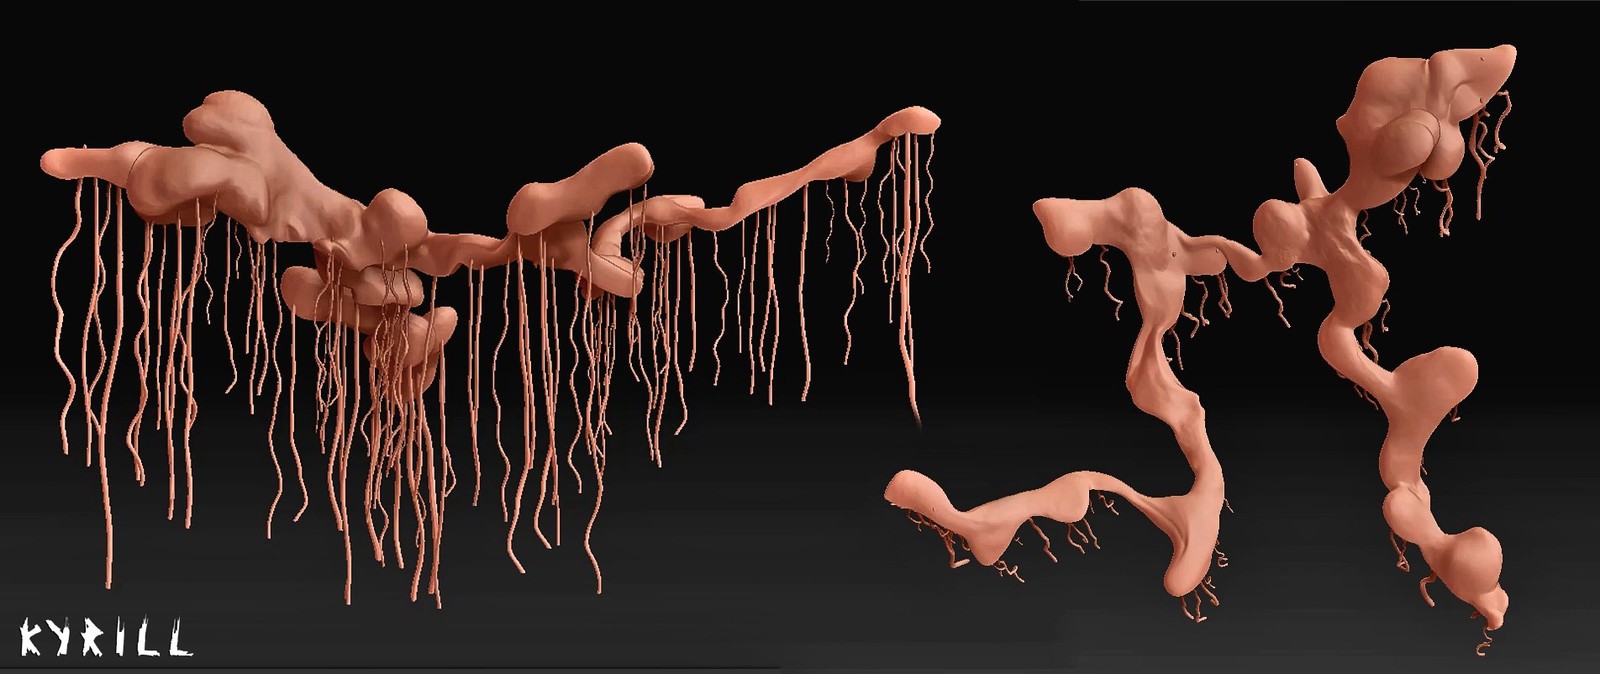 Clay render from of the tree/root models.